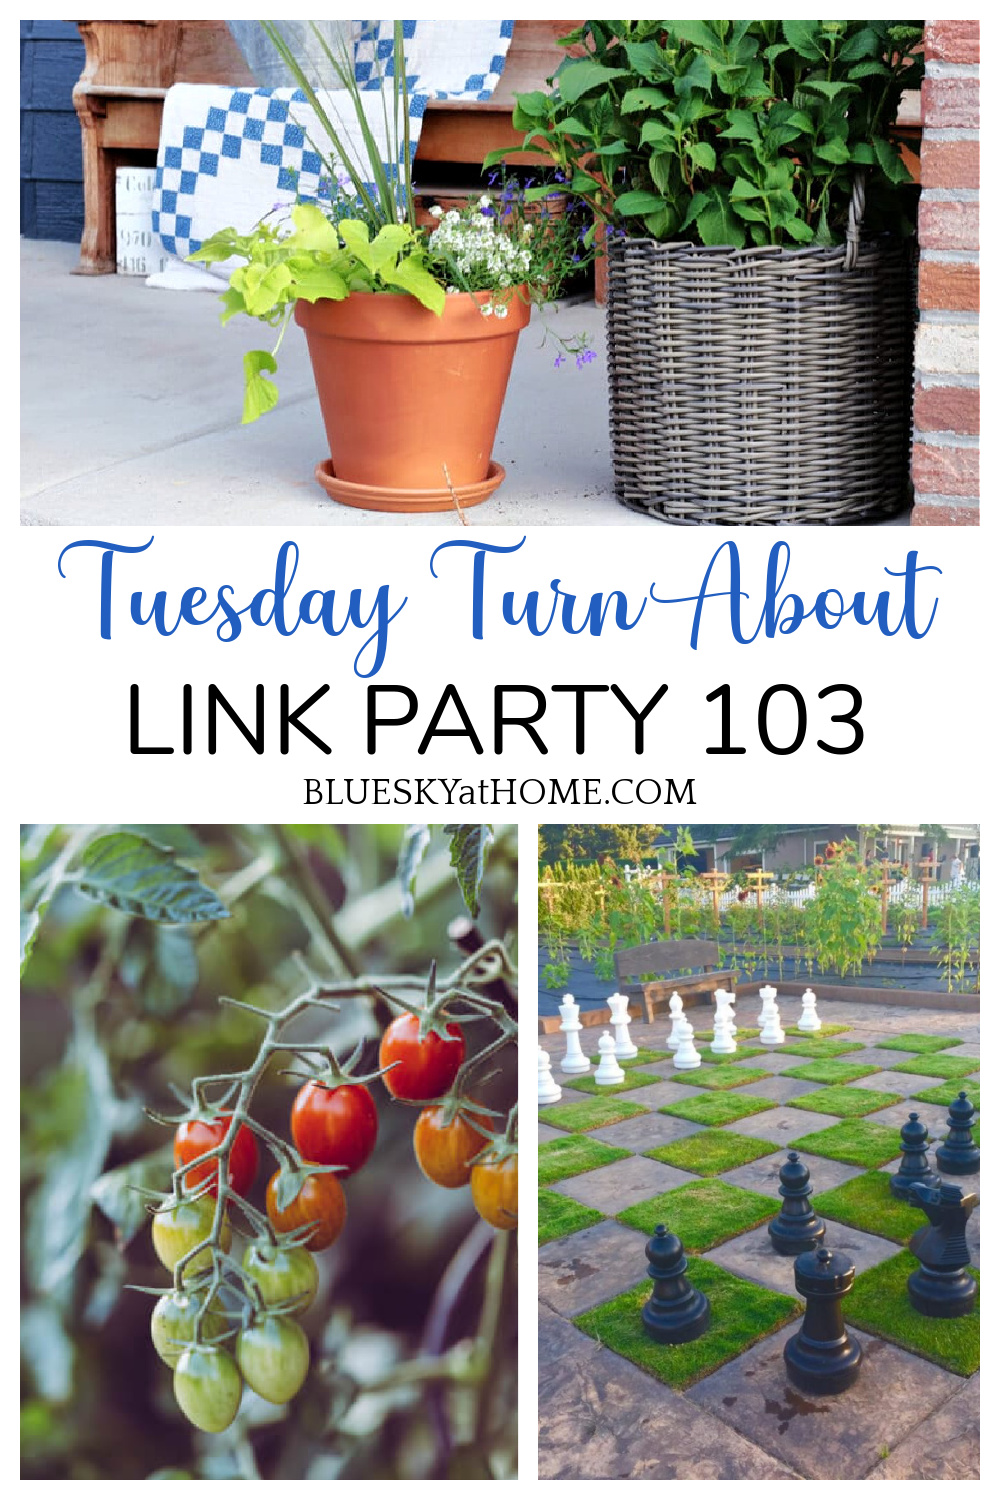 Tuesday Turn About Link Party 102